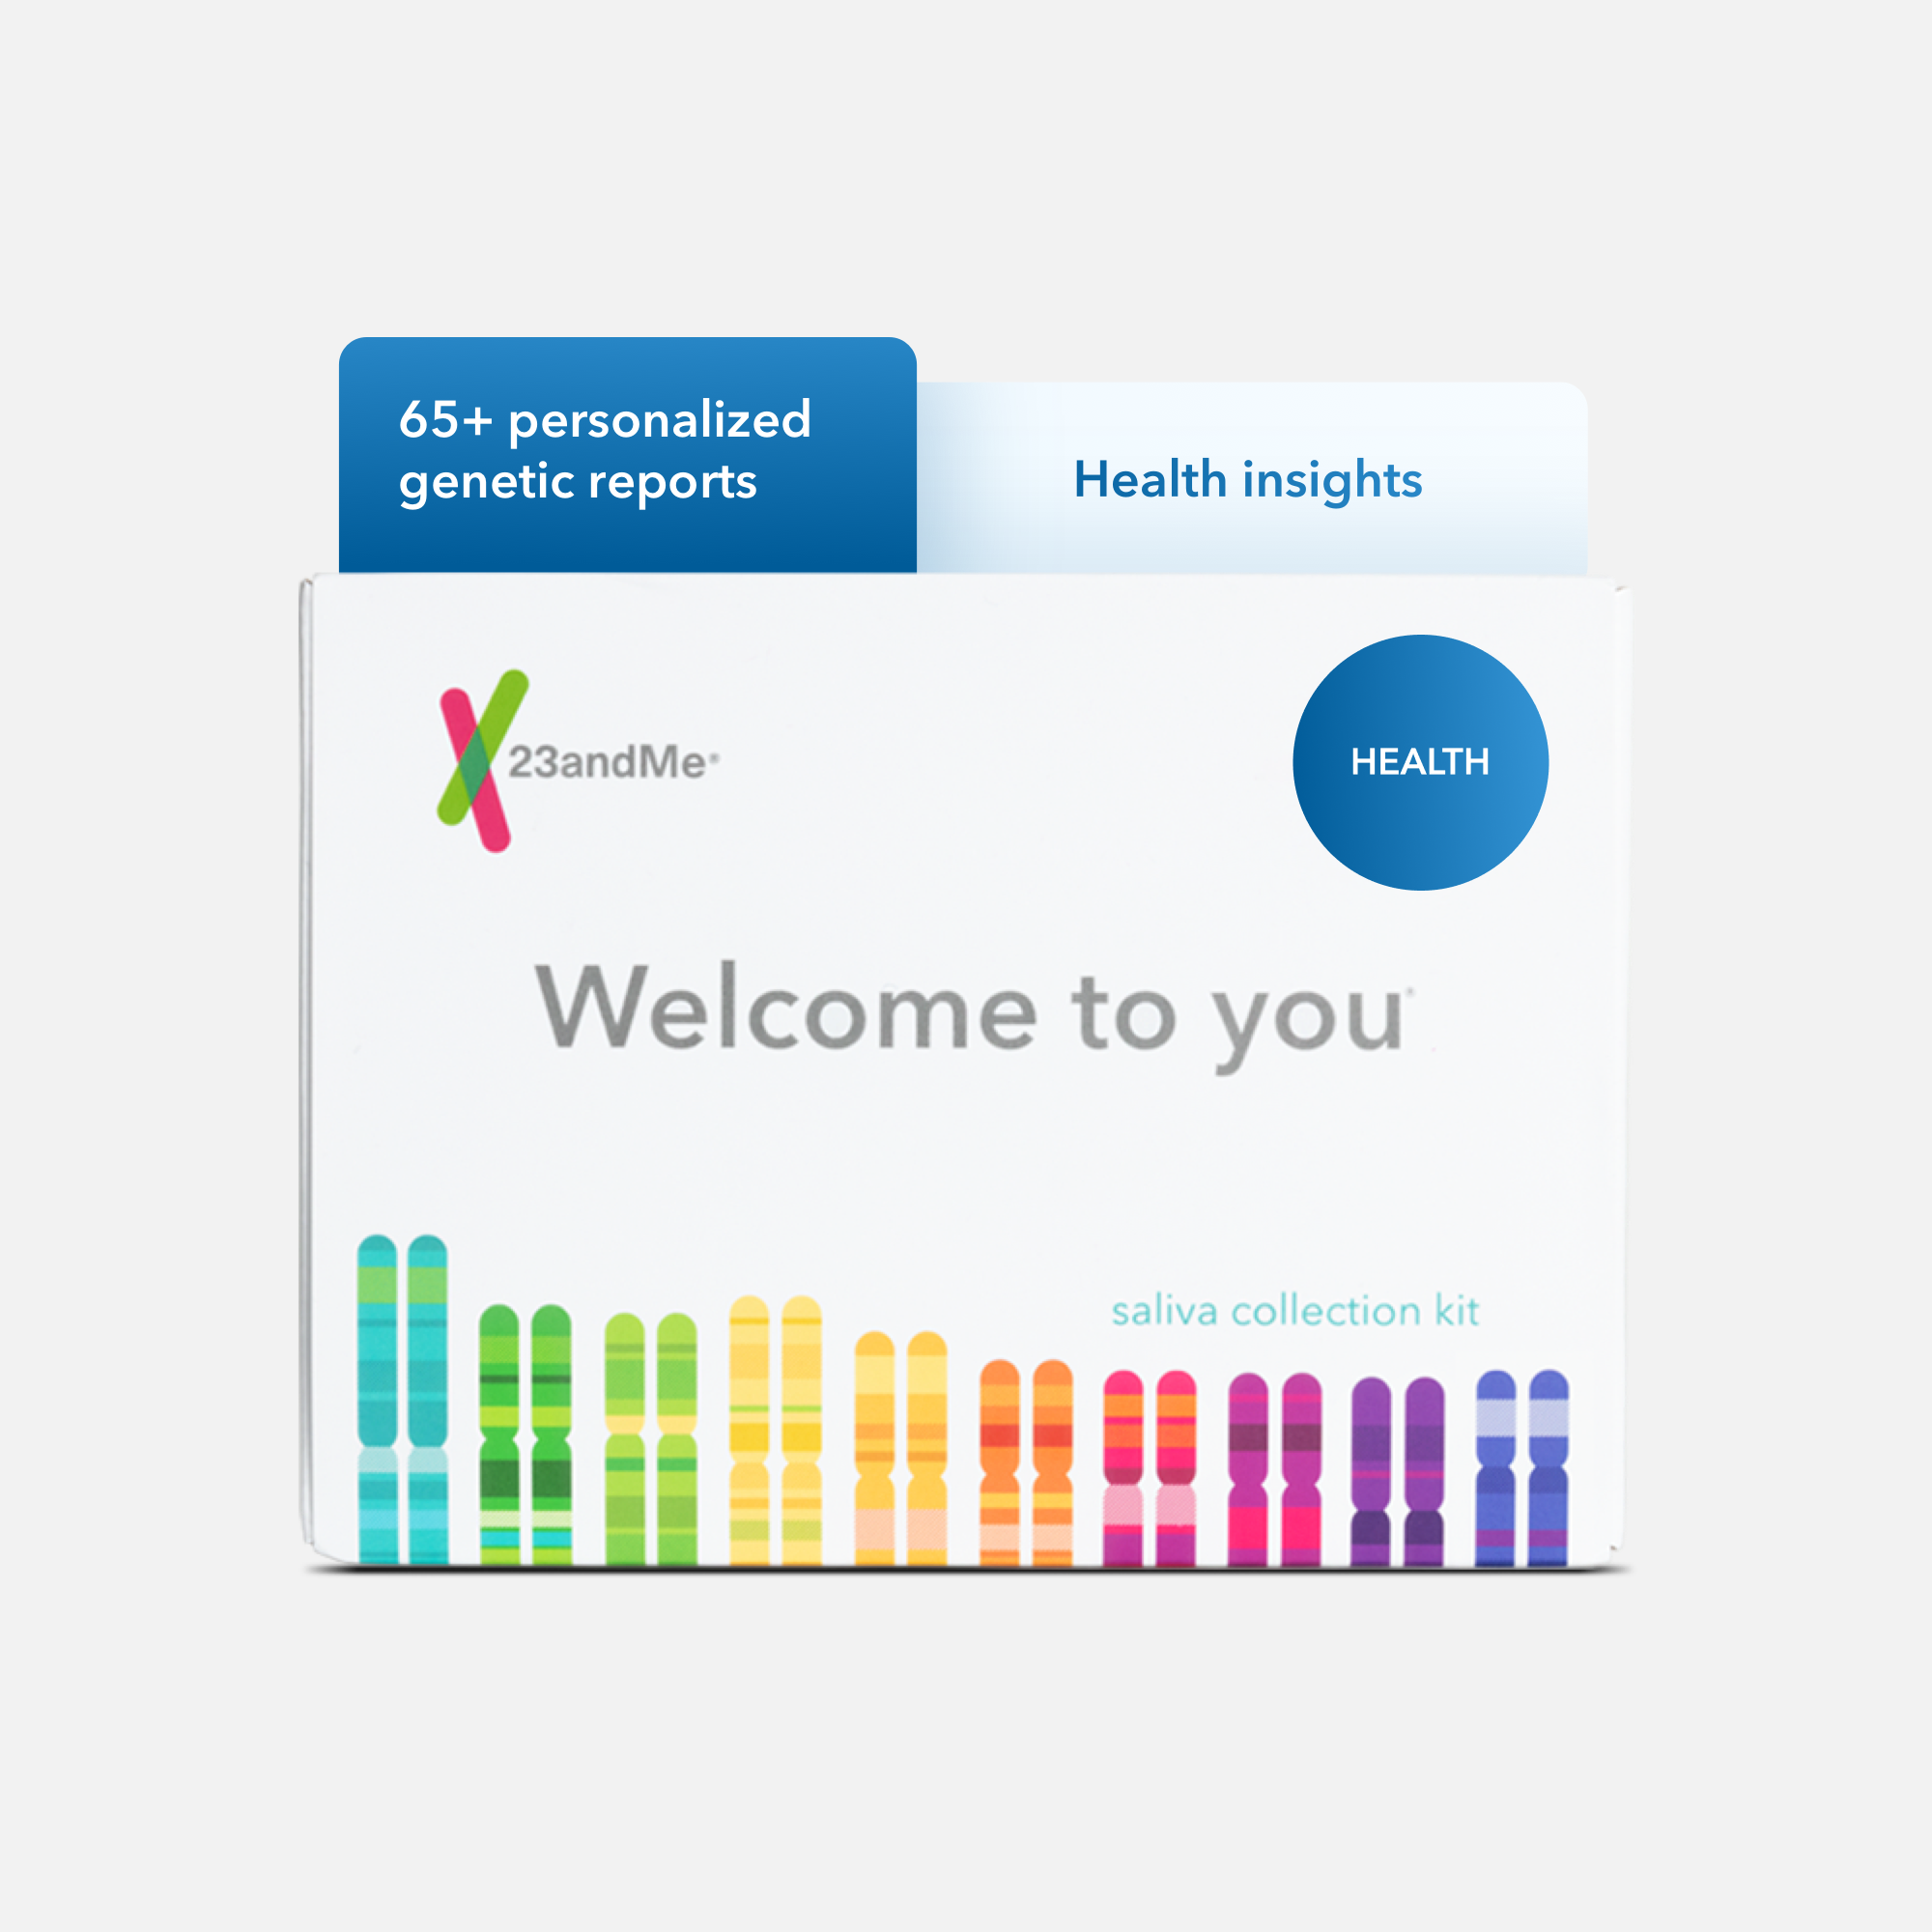 https://hsastore.com/on/demandware.static/-/Sites-hec-master/default/dwc8a4a86f/images/large/32162%20-%2023andme%20personal%20genetic%20dna%20test-05.png